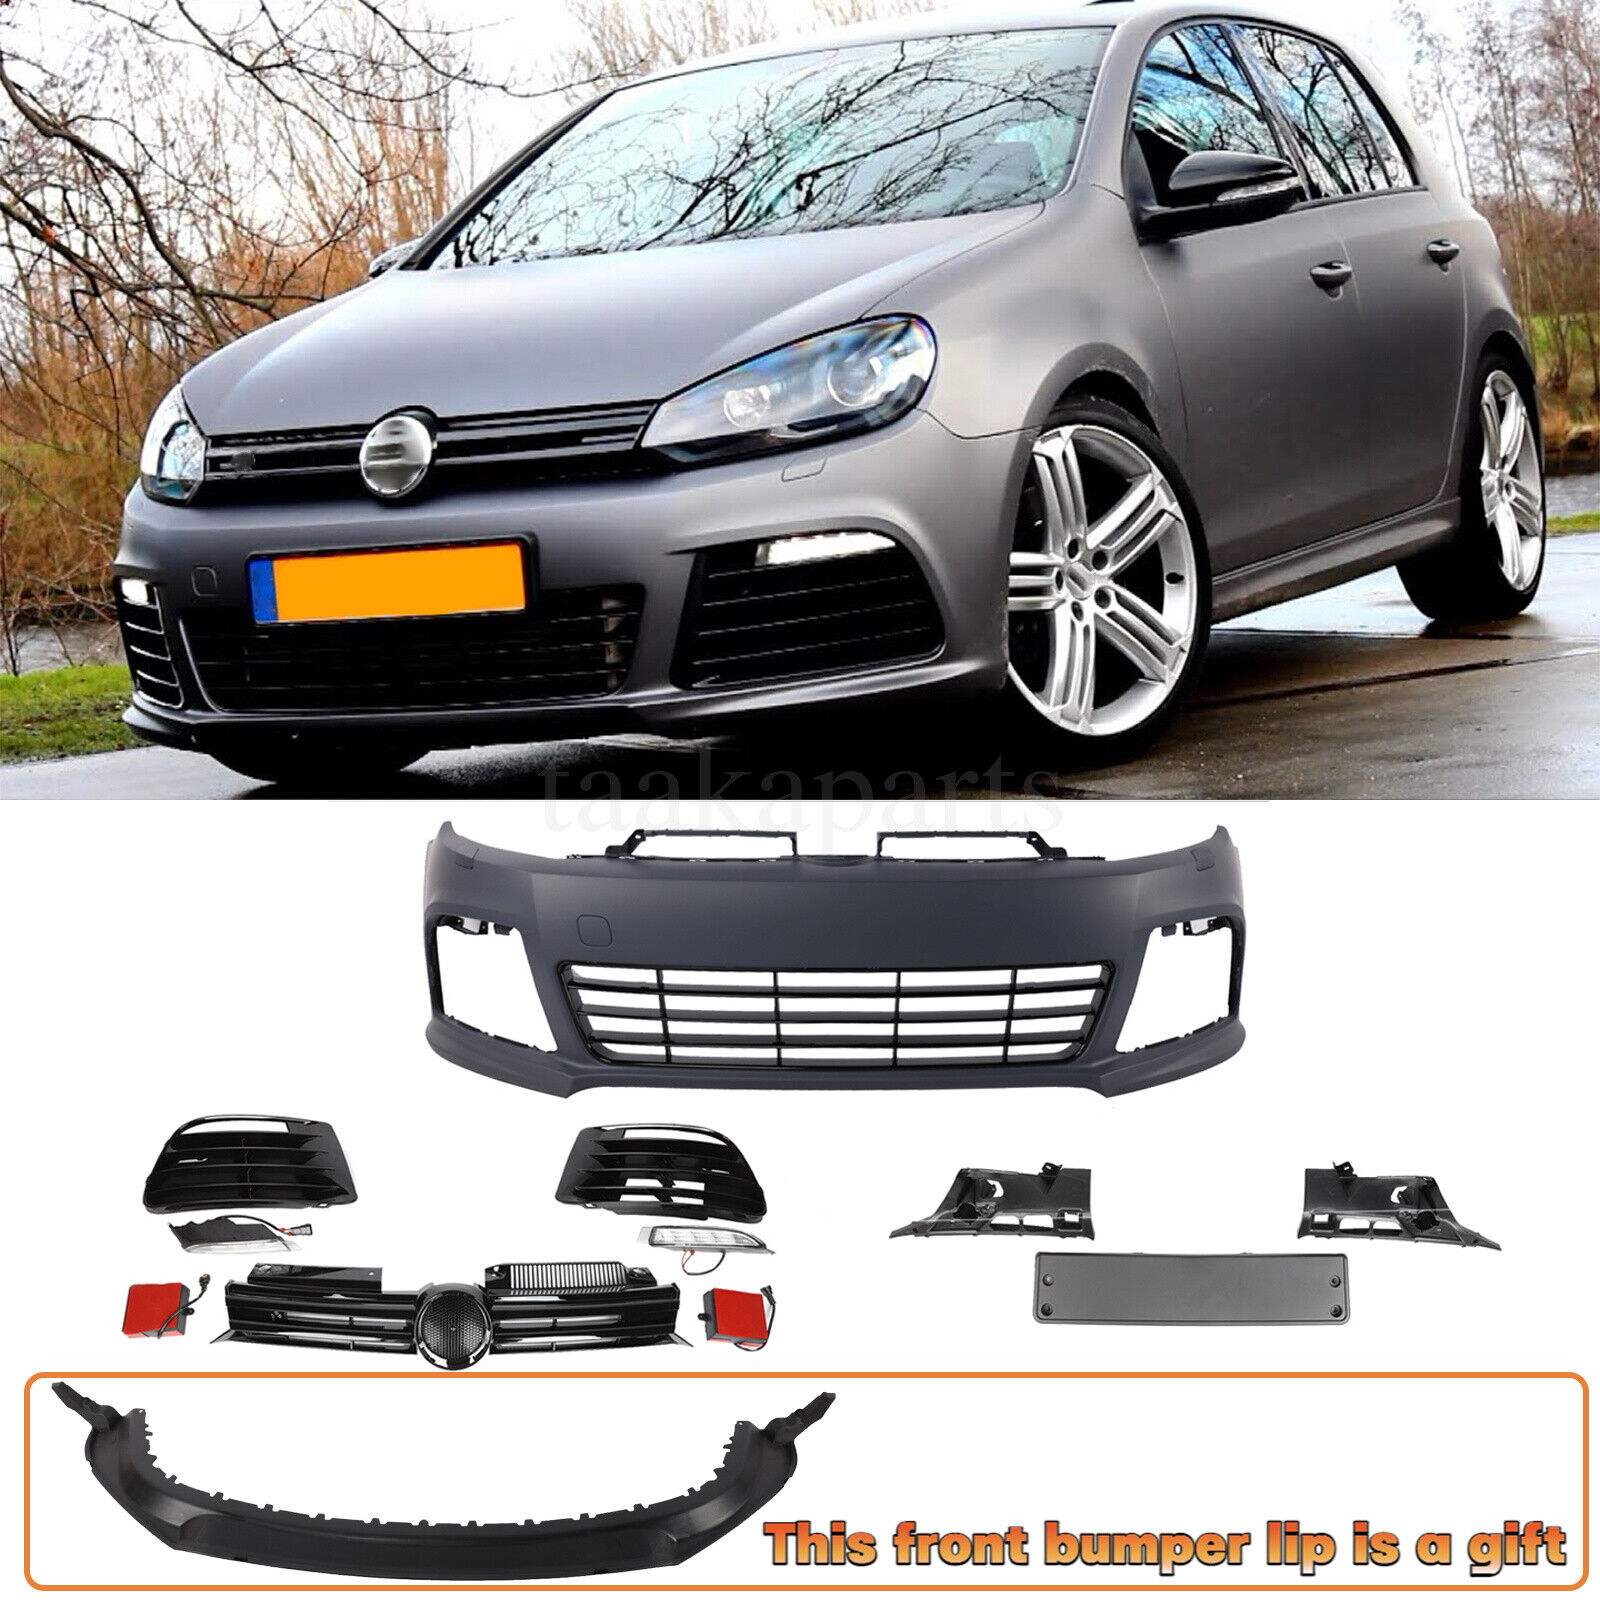 R20 Style Front Bumper Kit for Volkswagen Golf 6 2012 2013